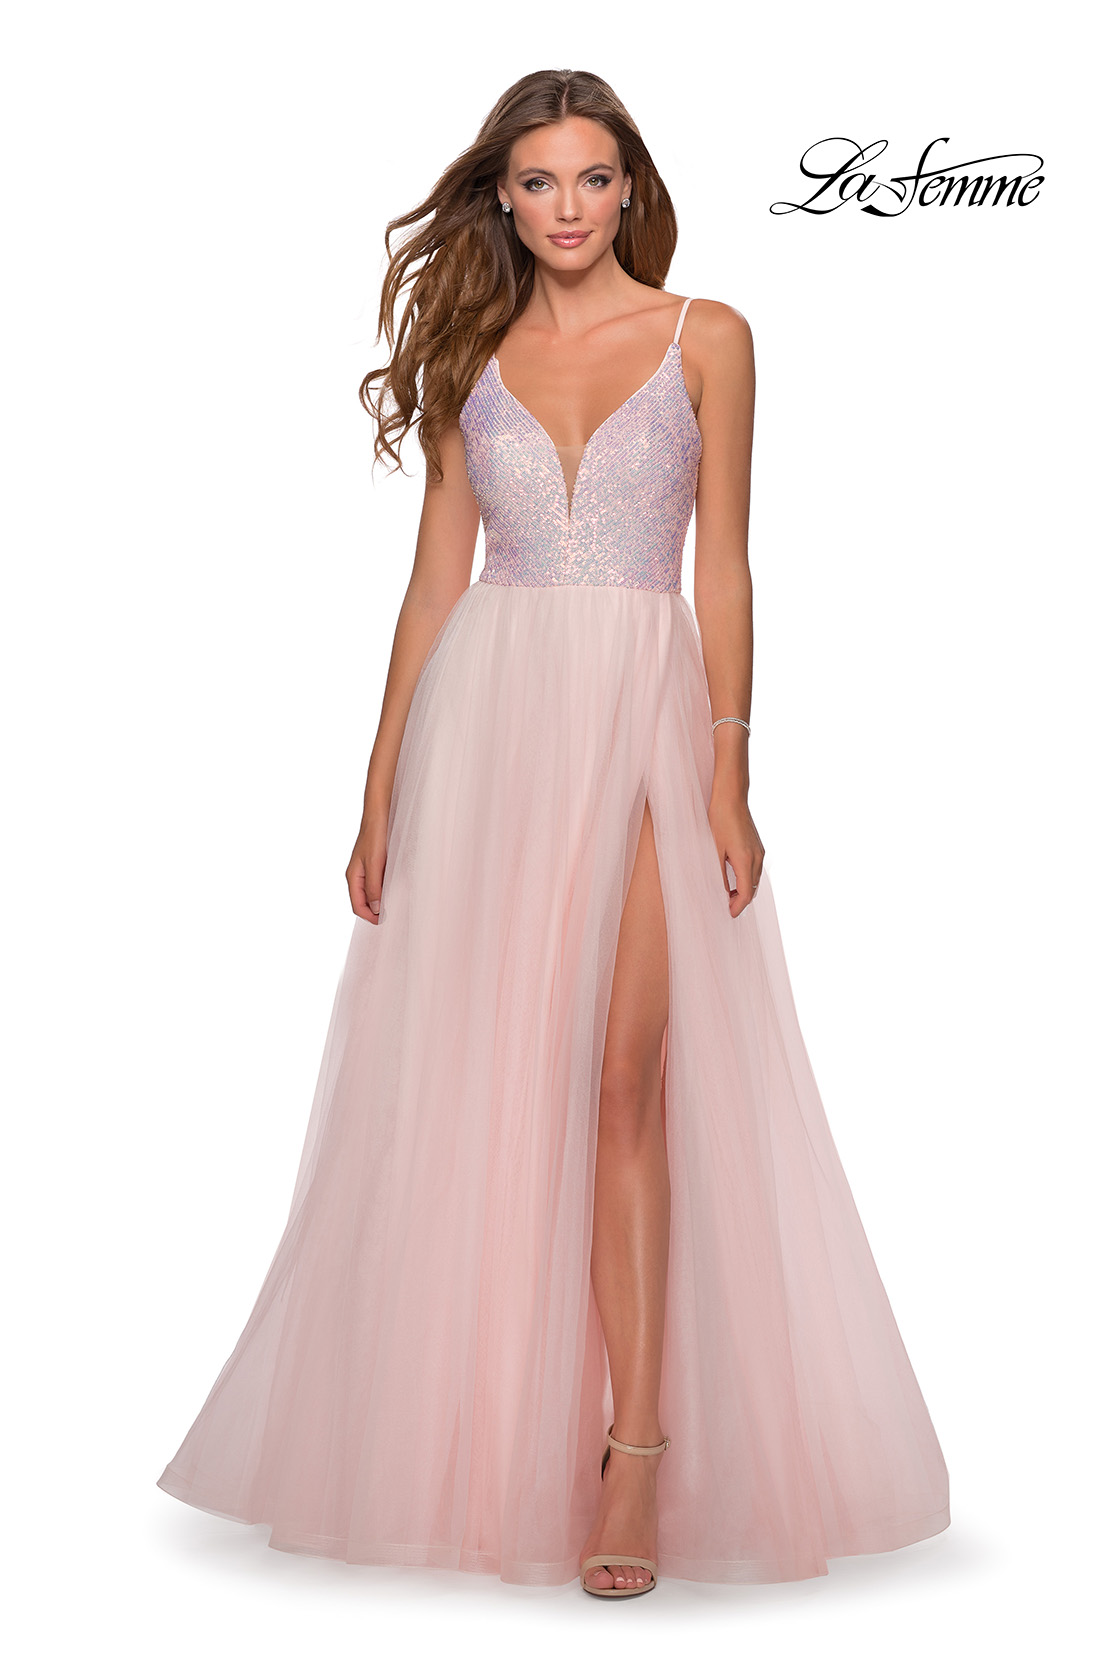 Long Pink Prom Dress with Metallic Accents - PromGirl